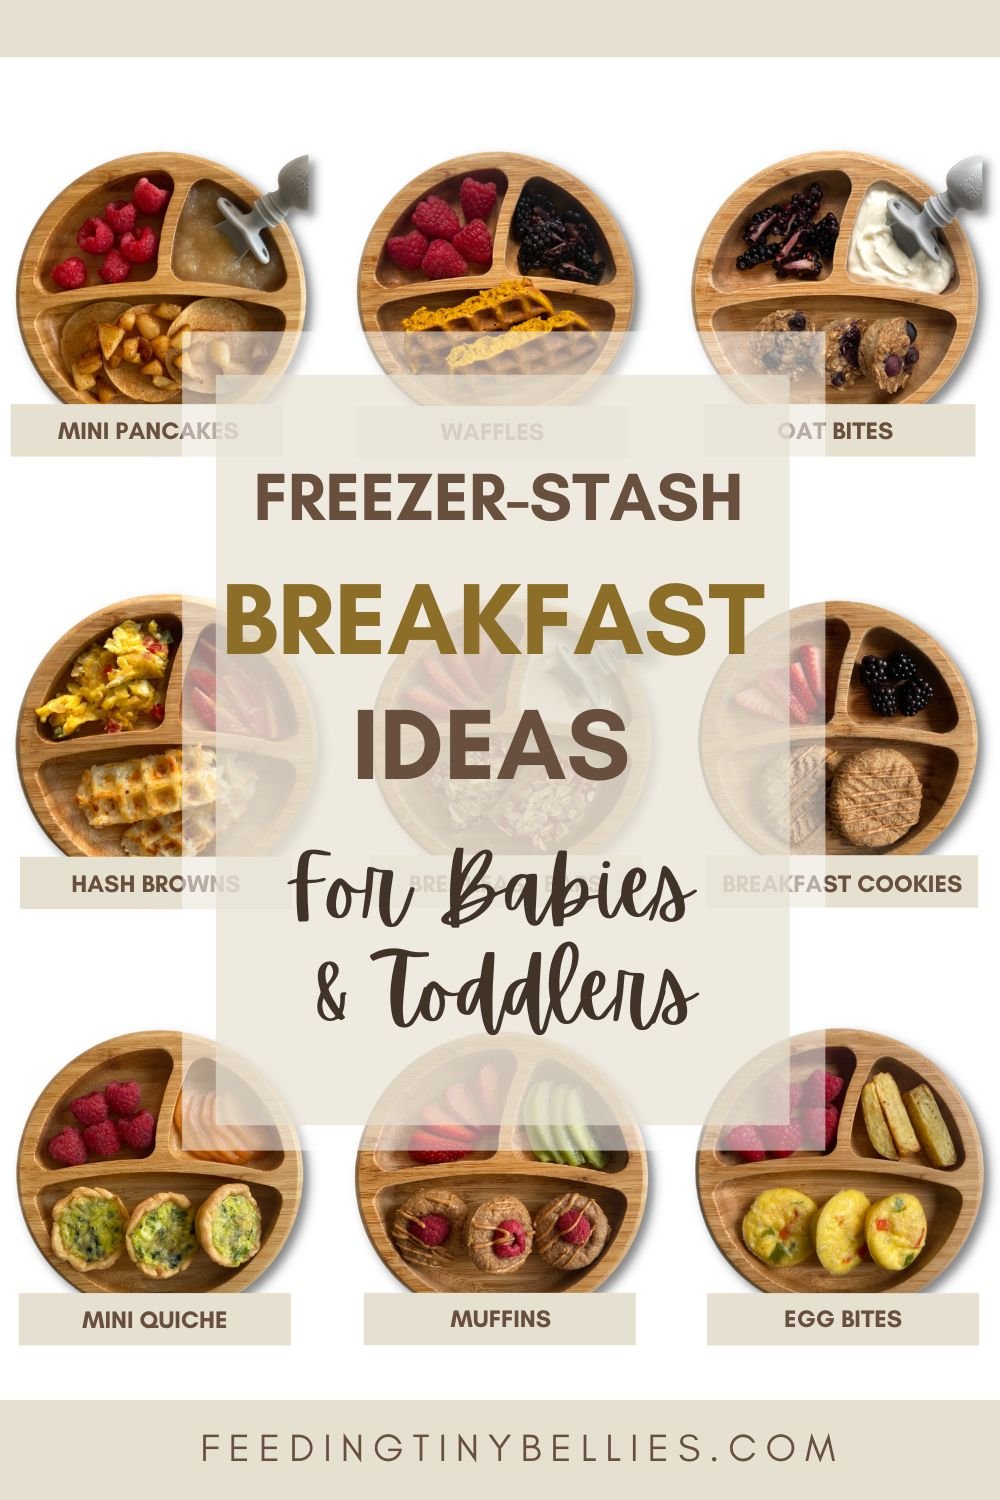 Freezer stash breakfast ideas for babies and toddlers.